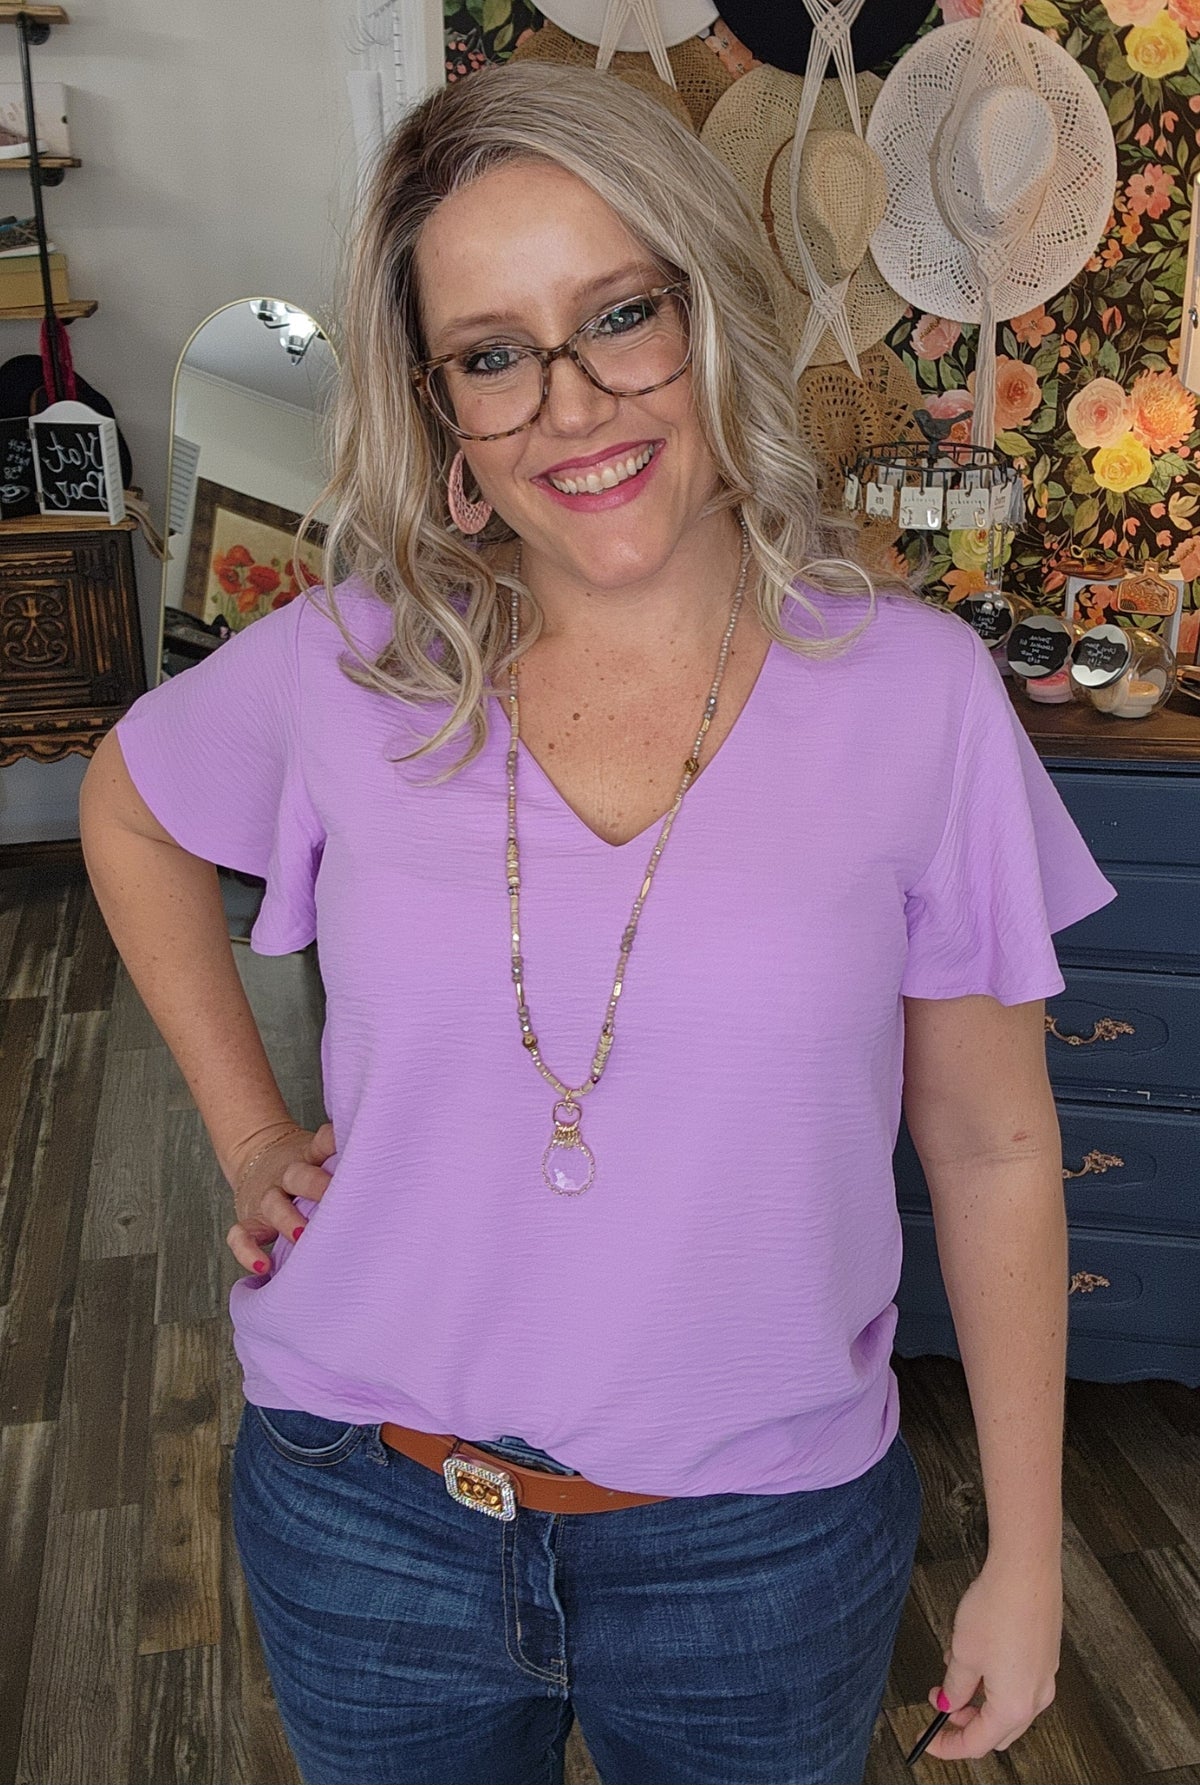 Flutter Sleeve Blouse in Lilac S - 3XL